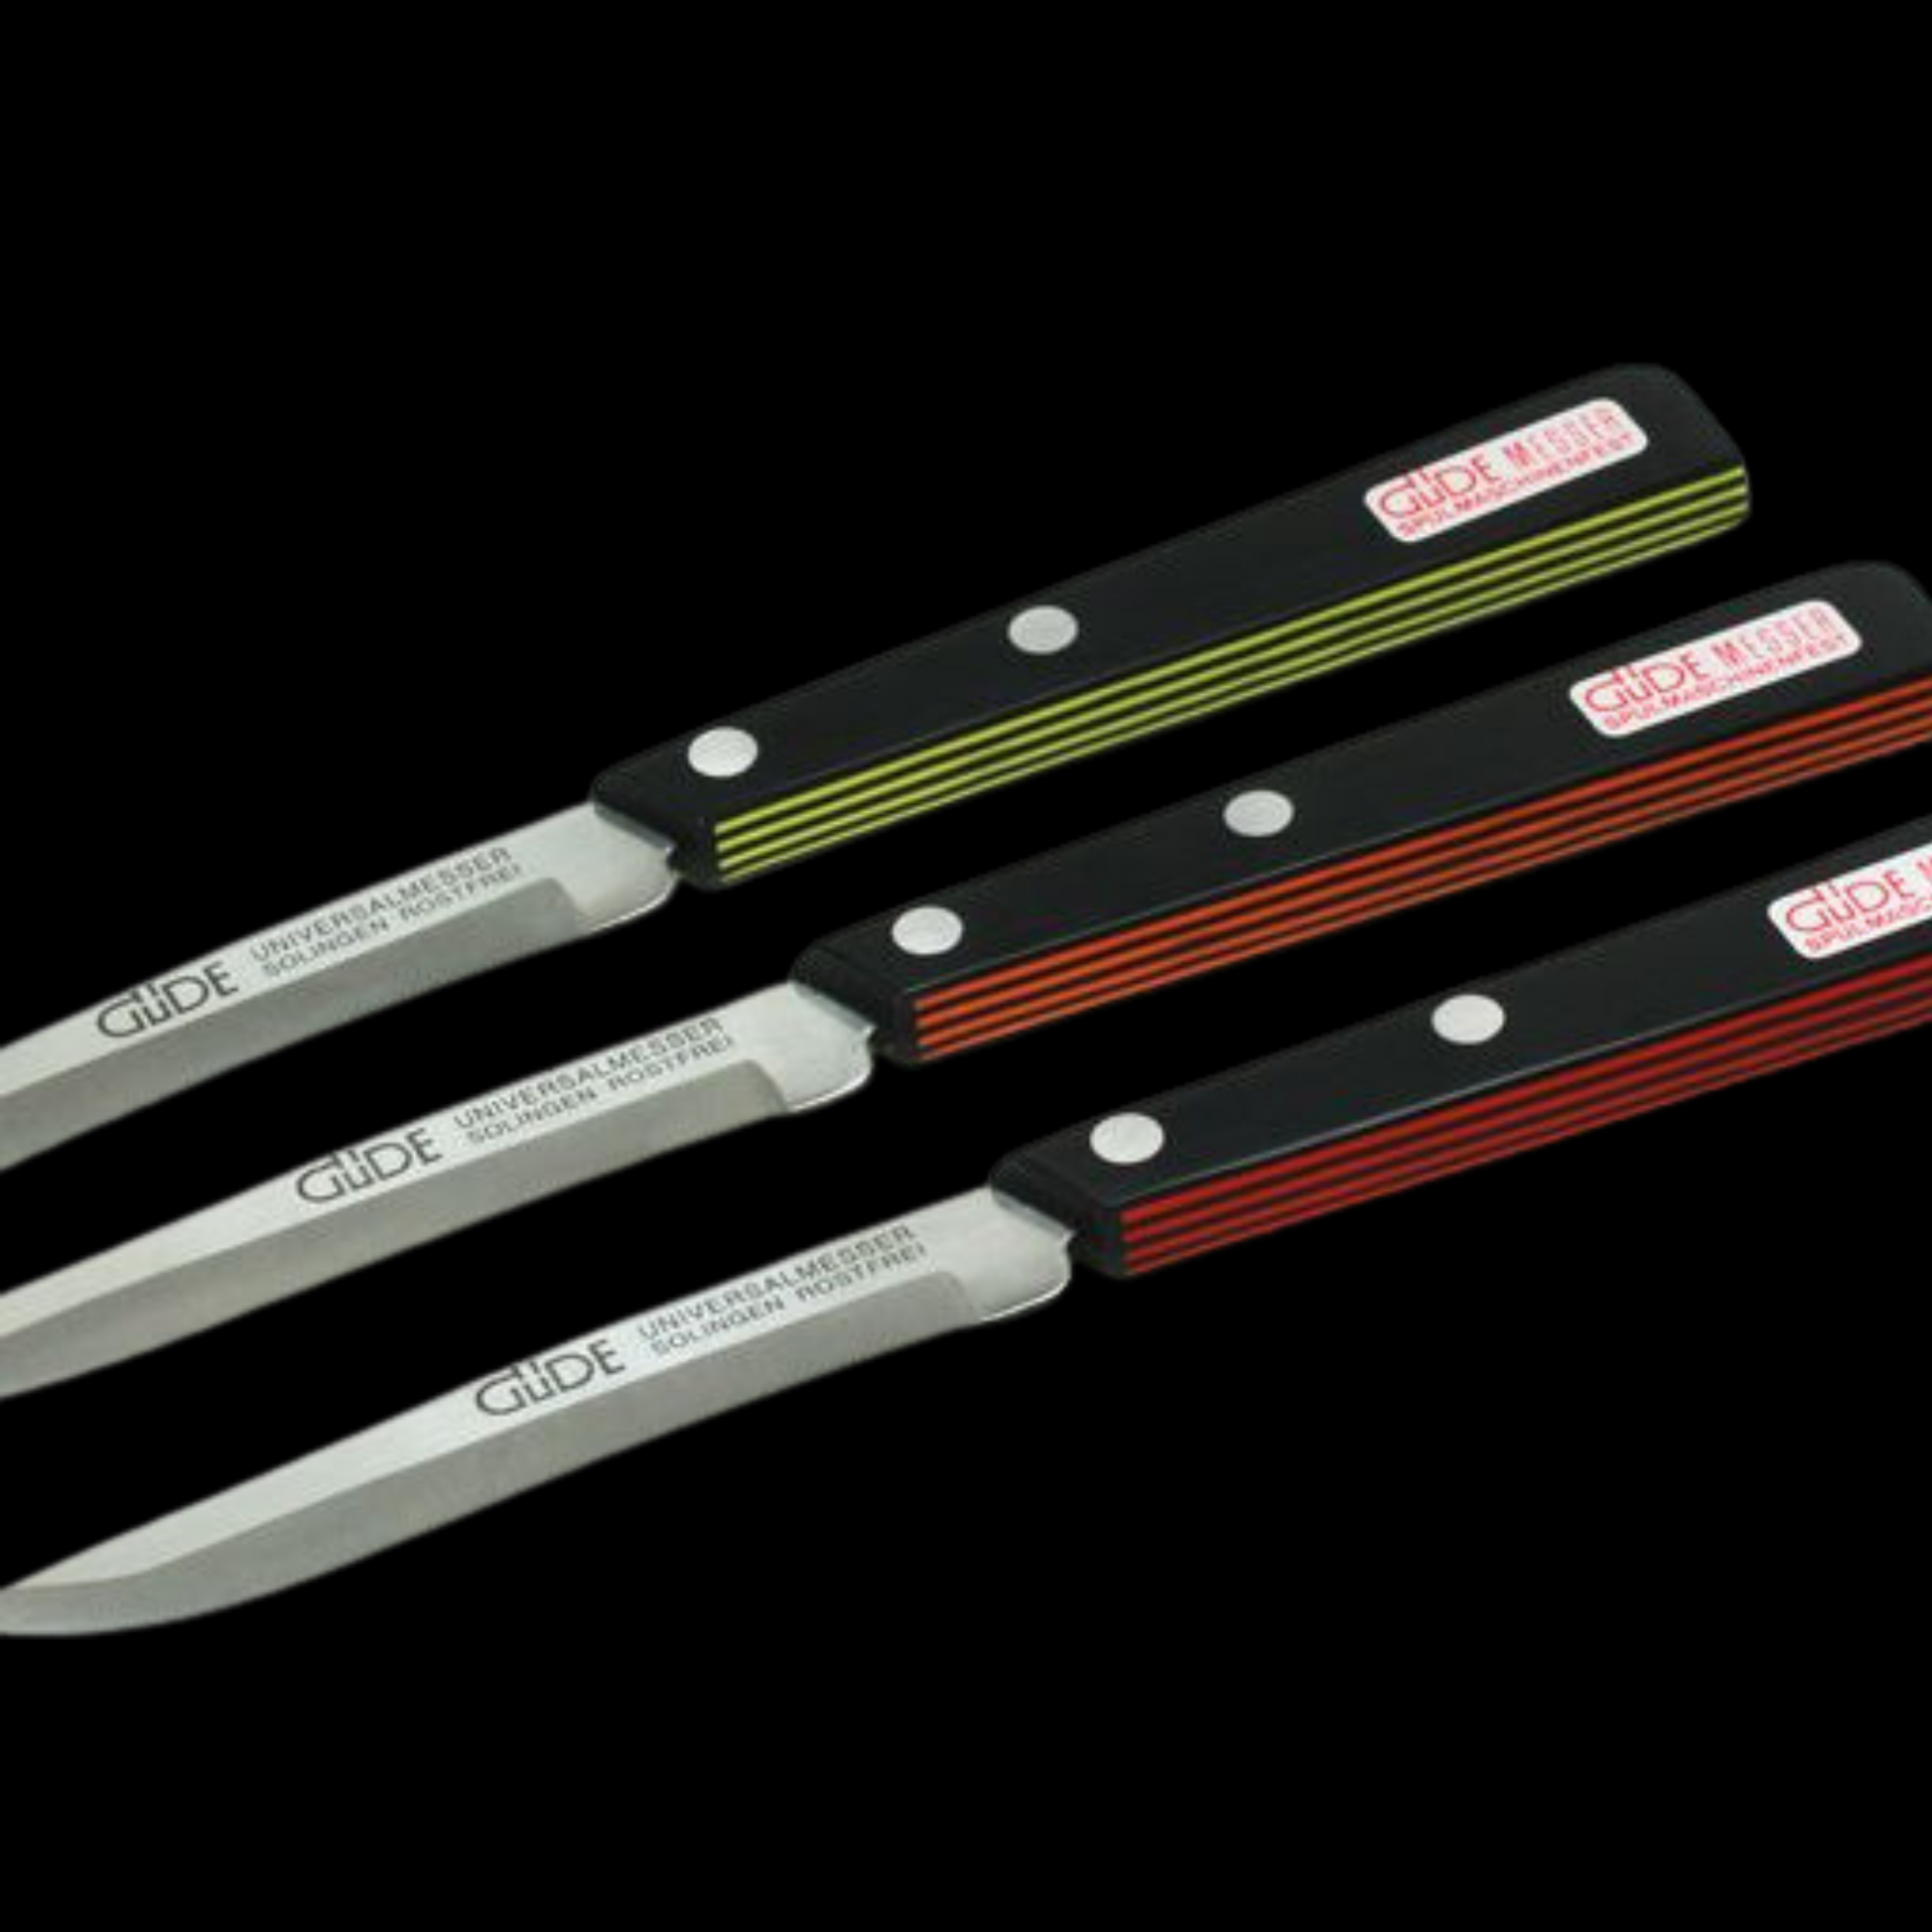 Gude Universal Knife Series 4", Black / Red Hostaform Handle and Serrated Blade - GuedeUSA